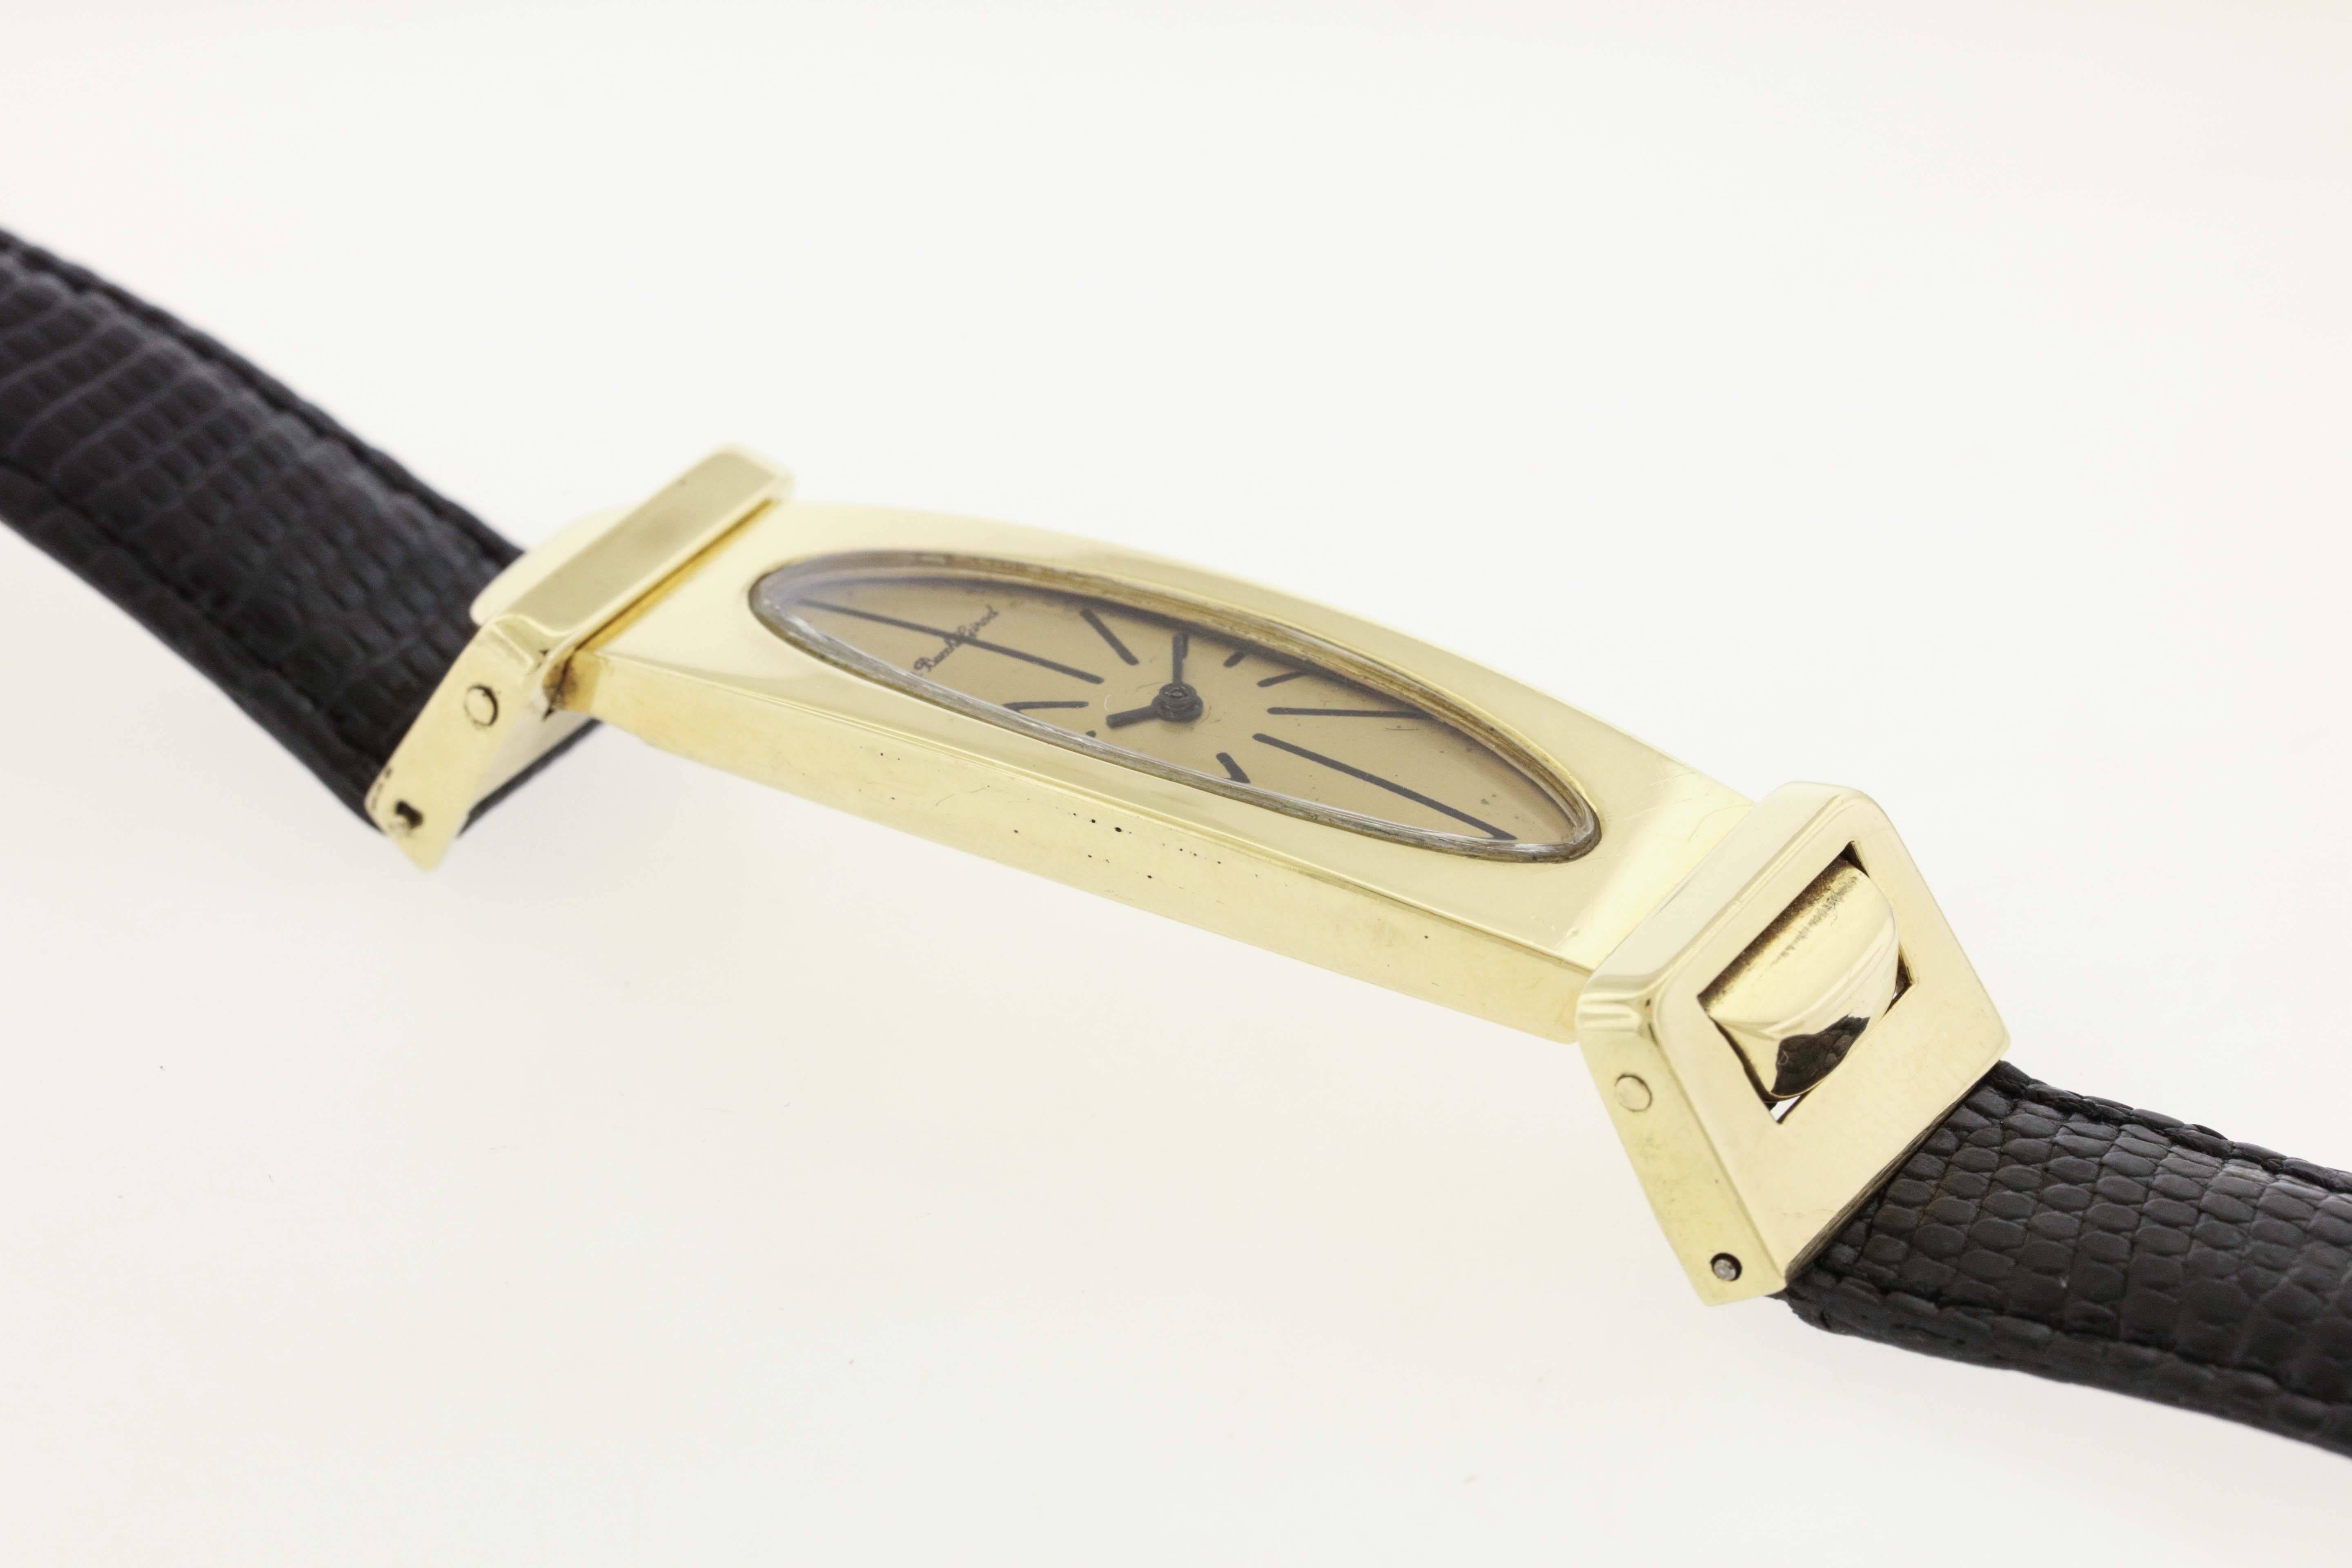 Design rules in this elongated stylized wristwatch from the 1970's from Swiss maker Bueche Girod, known for their avant-garde designs and fine watchmaking. The 18K gold case measures 16mm x 59mm (including lugs), snapback, fixed angular lugs at 120